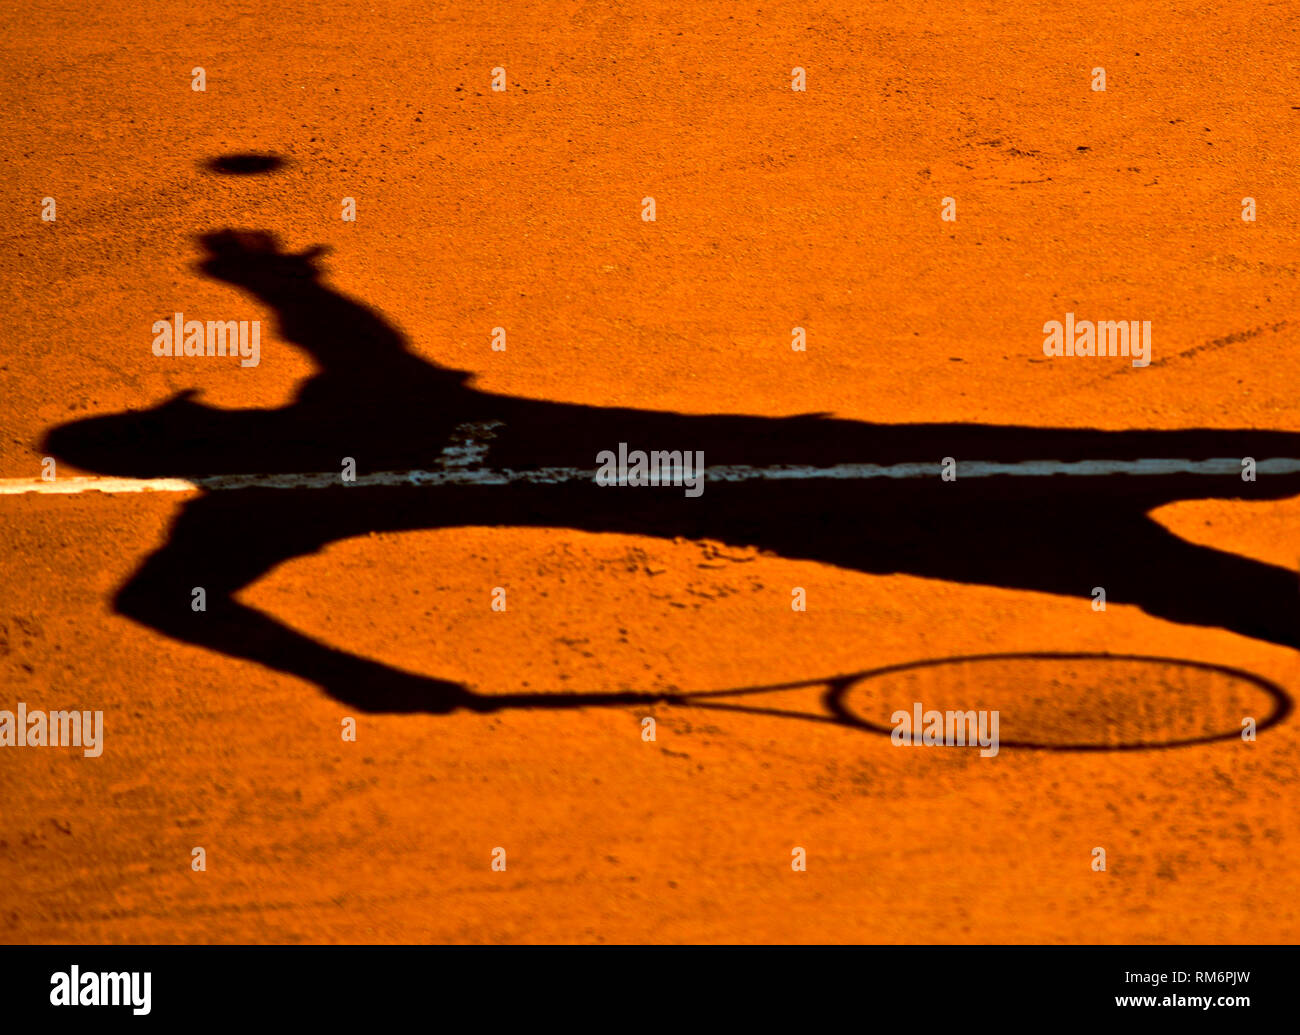 Shadow of a tennis player serving Stock Photo